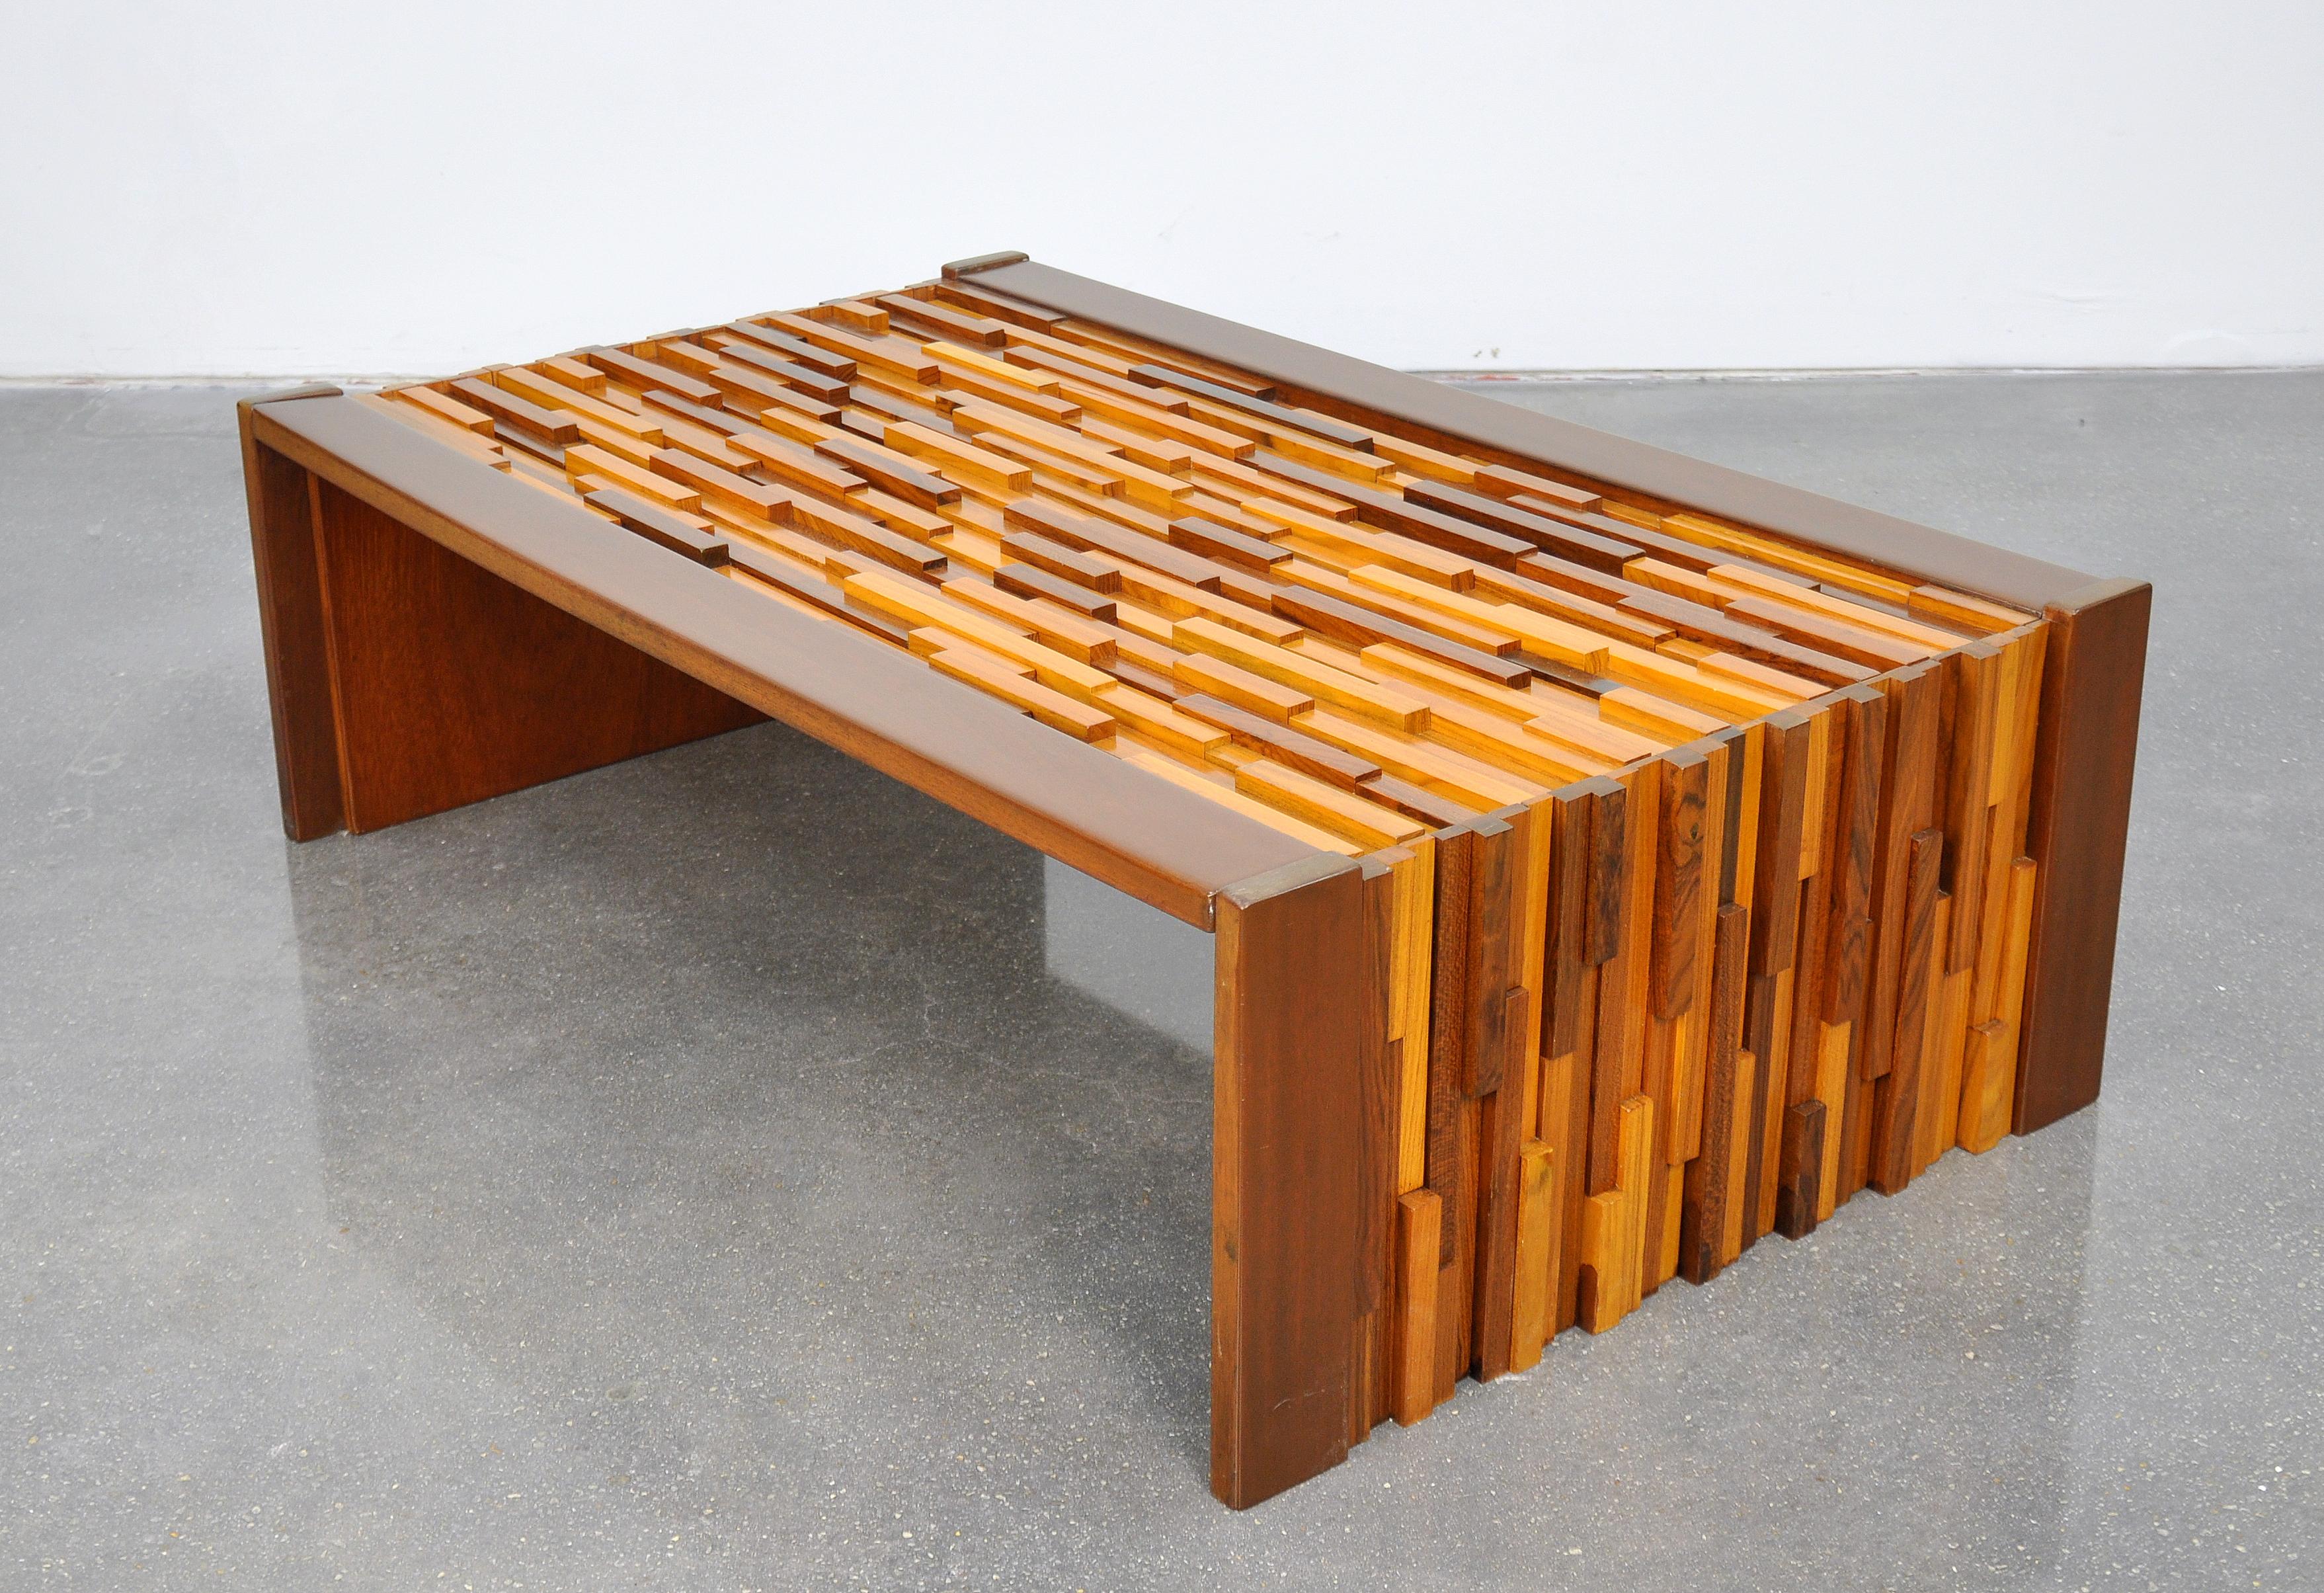 Percival Lafer Rosewood, Teak and Mahogany Brutalist Coffee Table 1